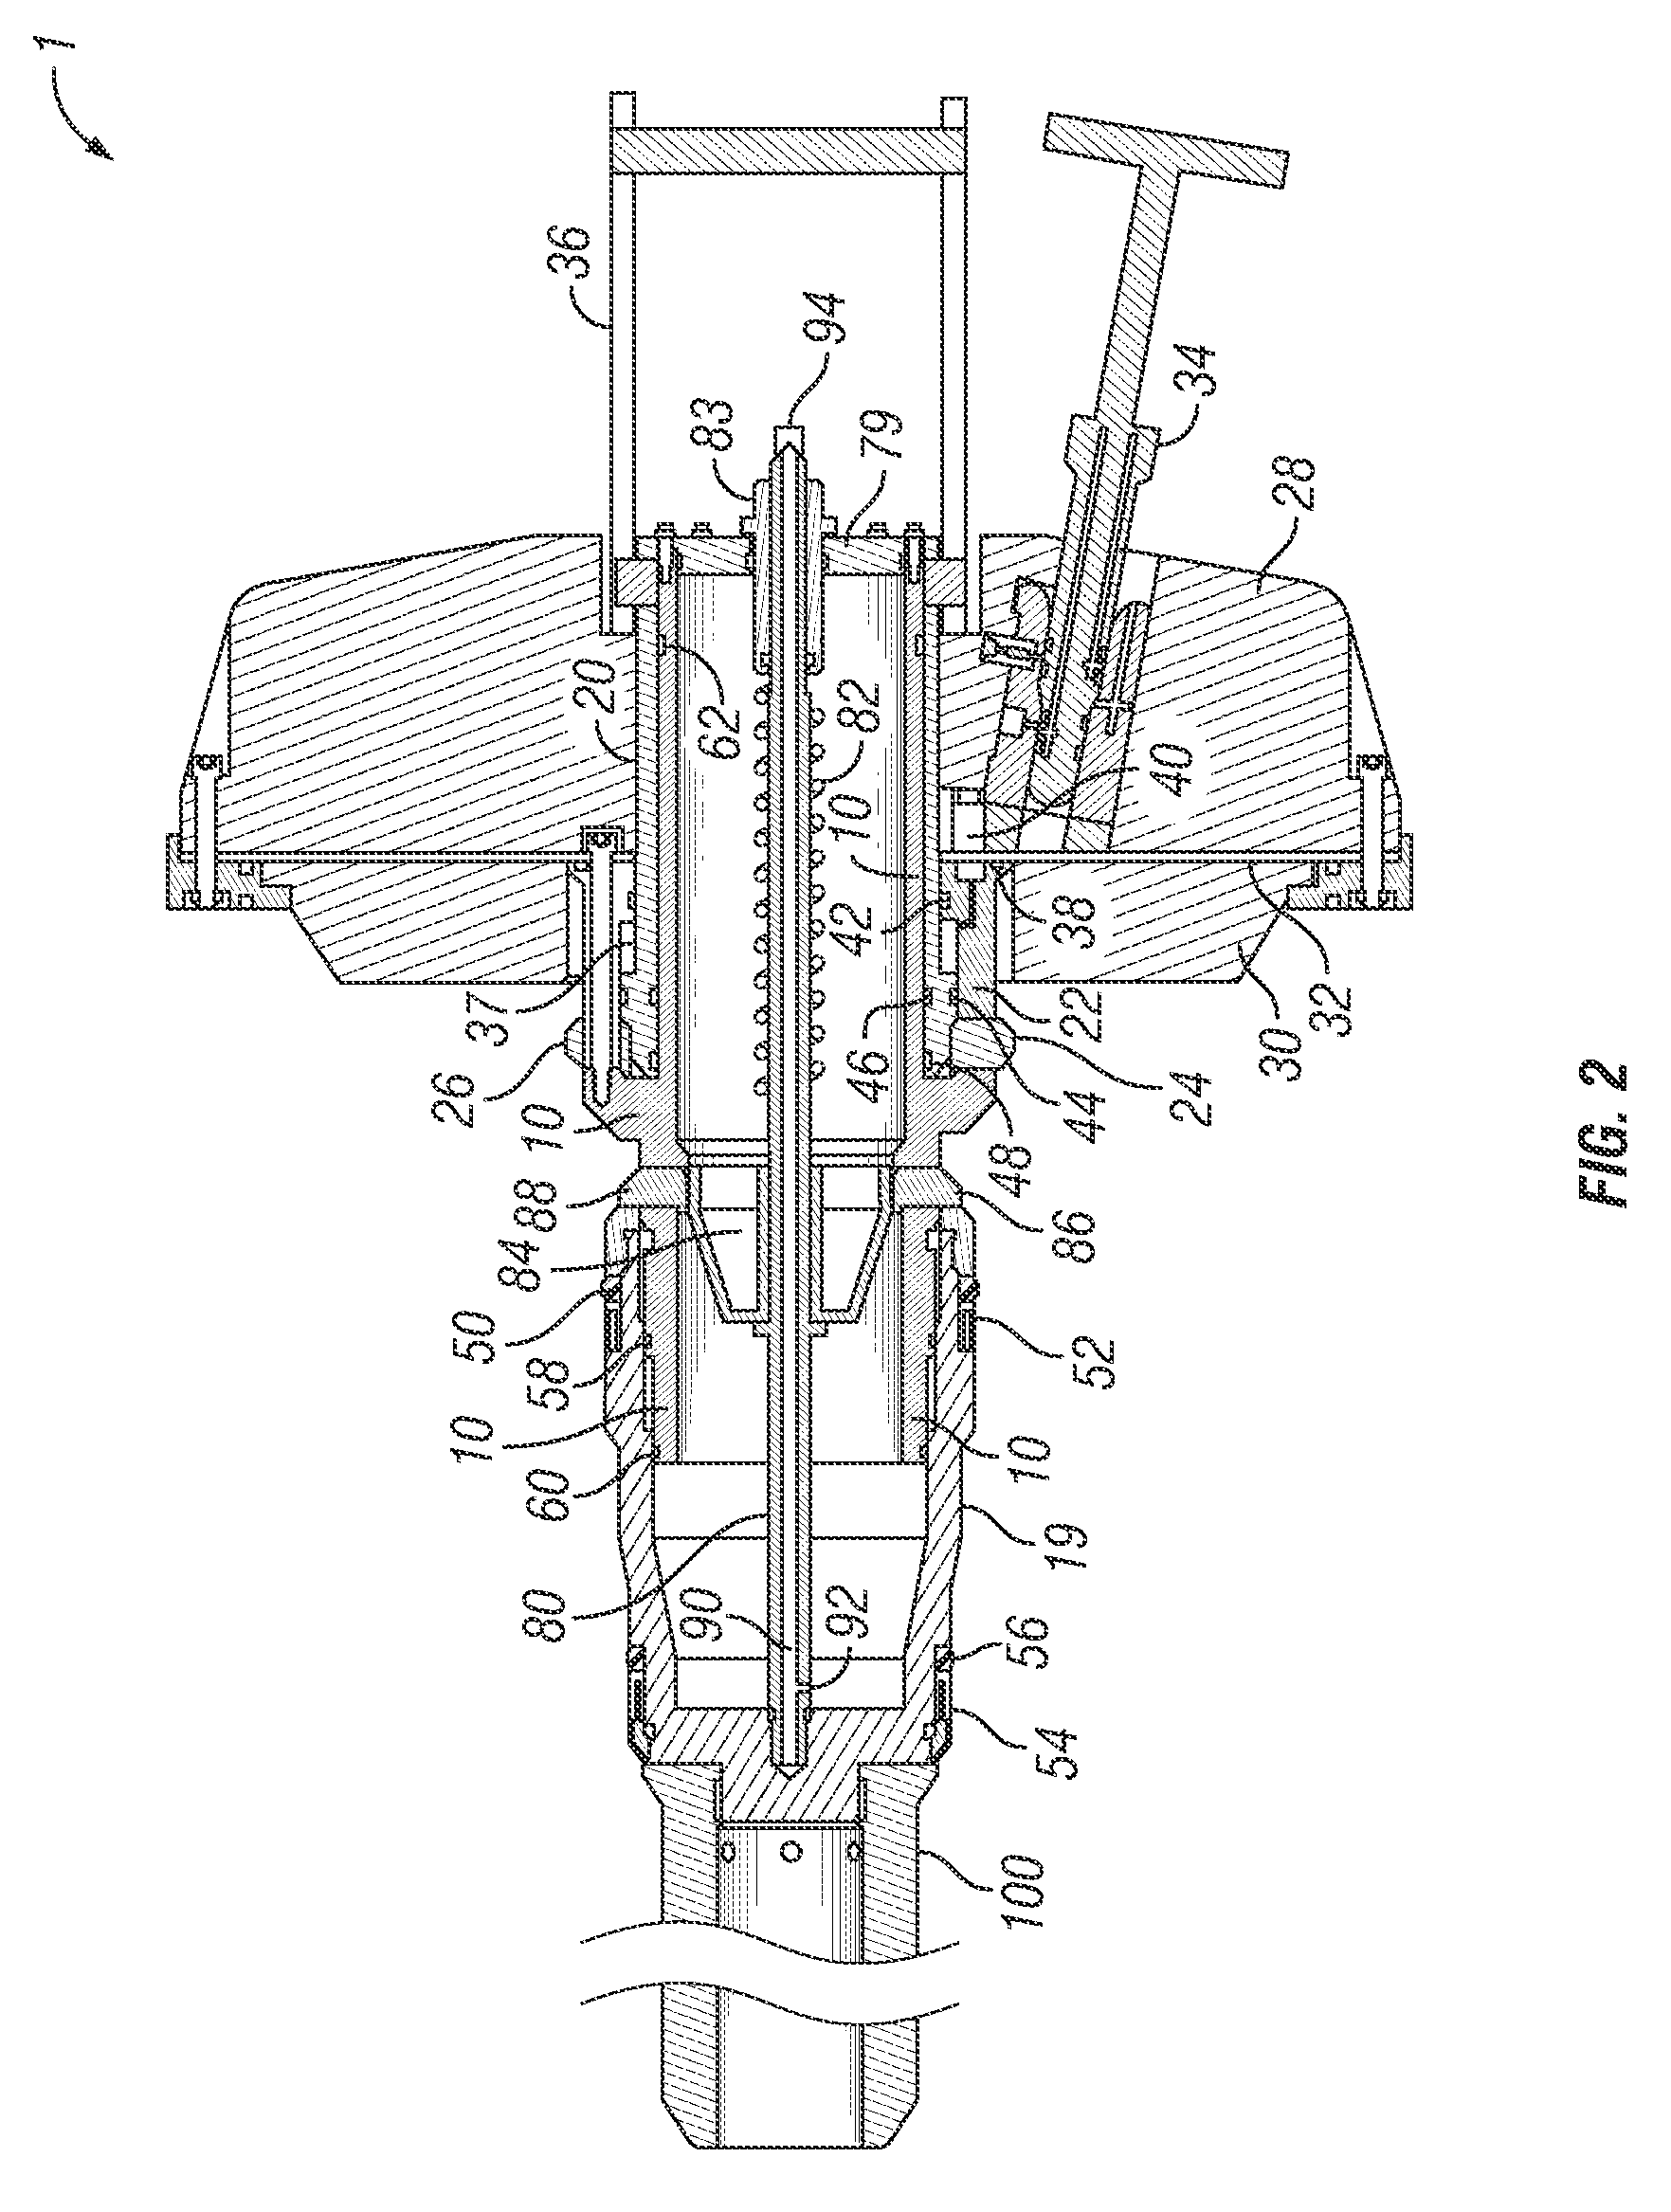 Subsea tree cap and method for installing the subsea tree cap